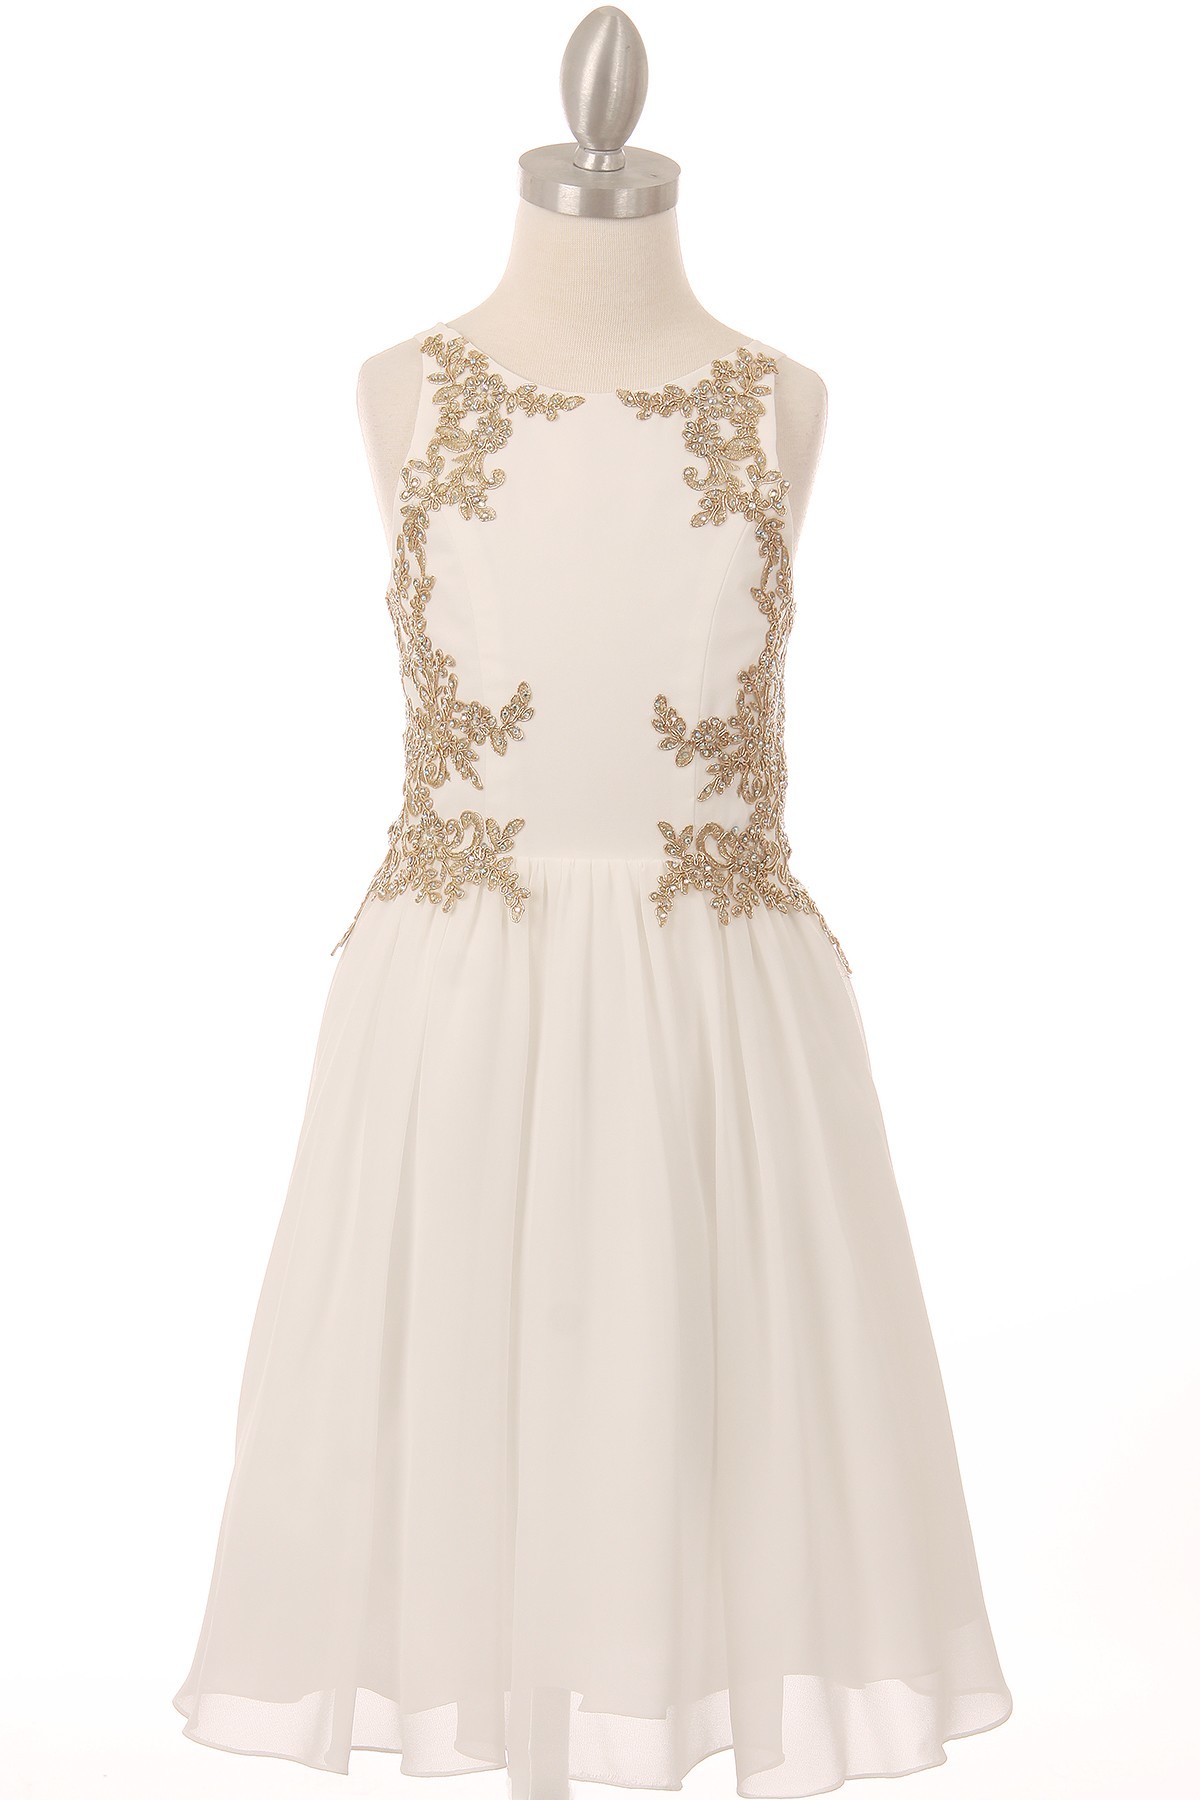  dress with golden lace